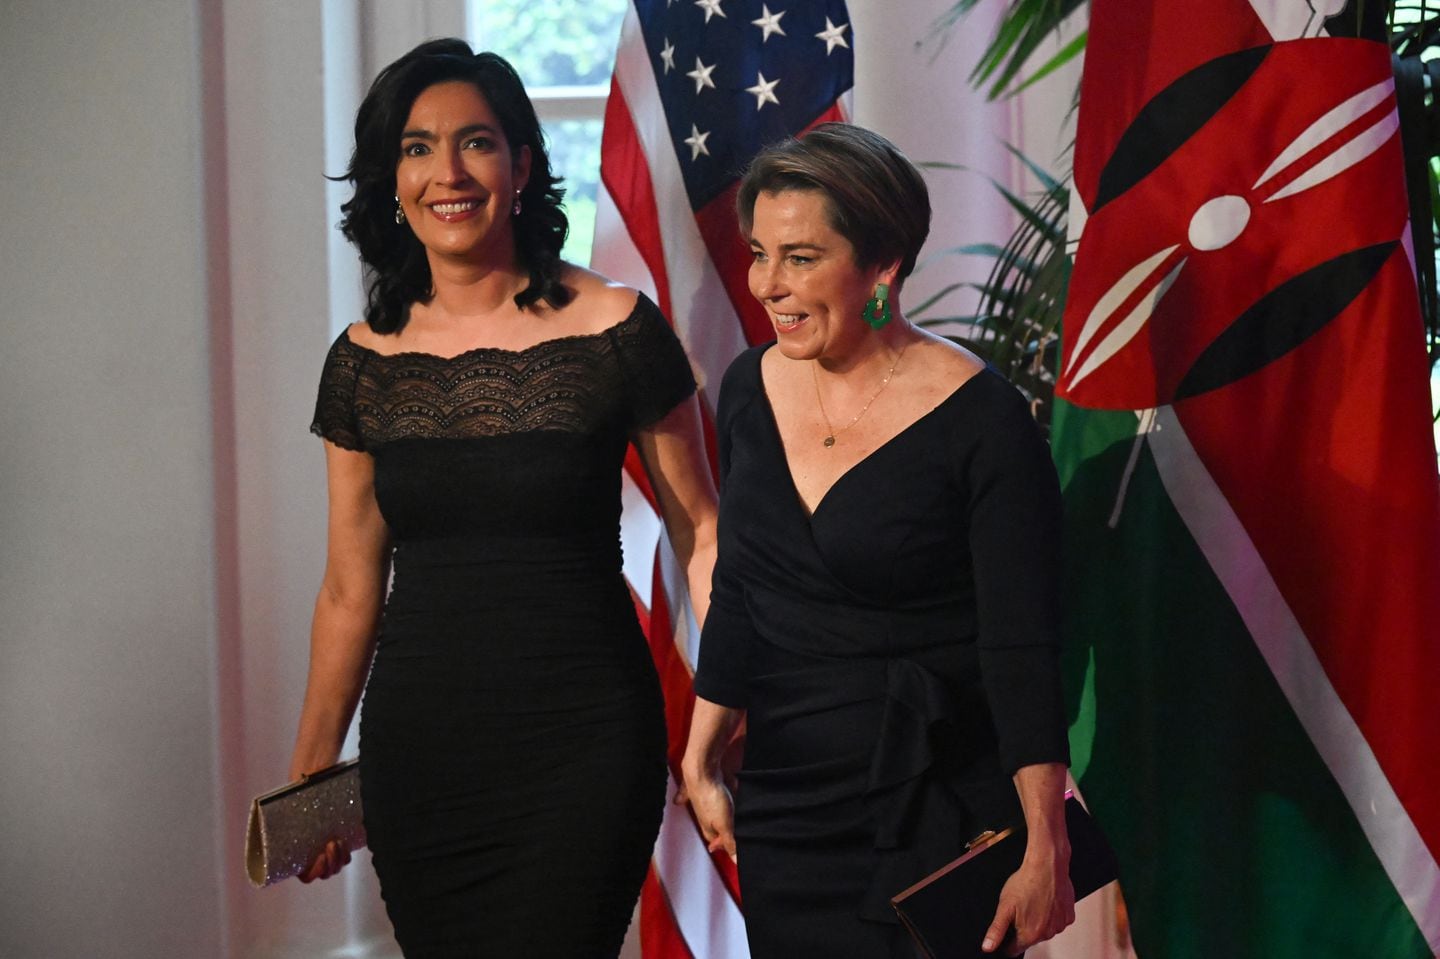 Governor Maura Healey and her partner Joanna Lydgate arrive at the Booksellers Room of the White House for the state dinner with the Kenyan president.